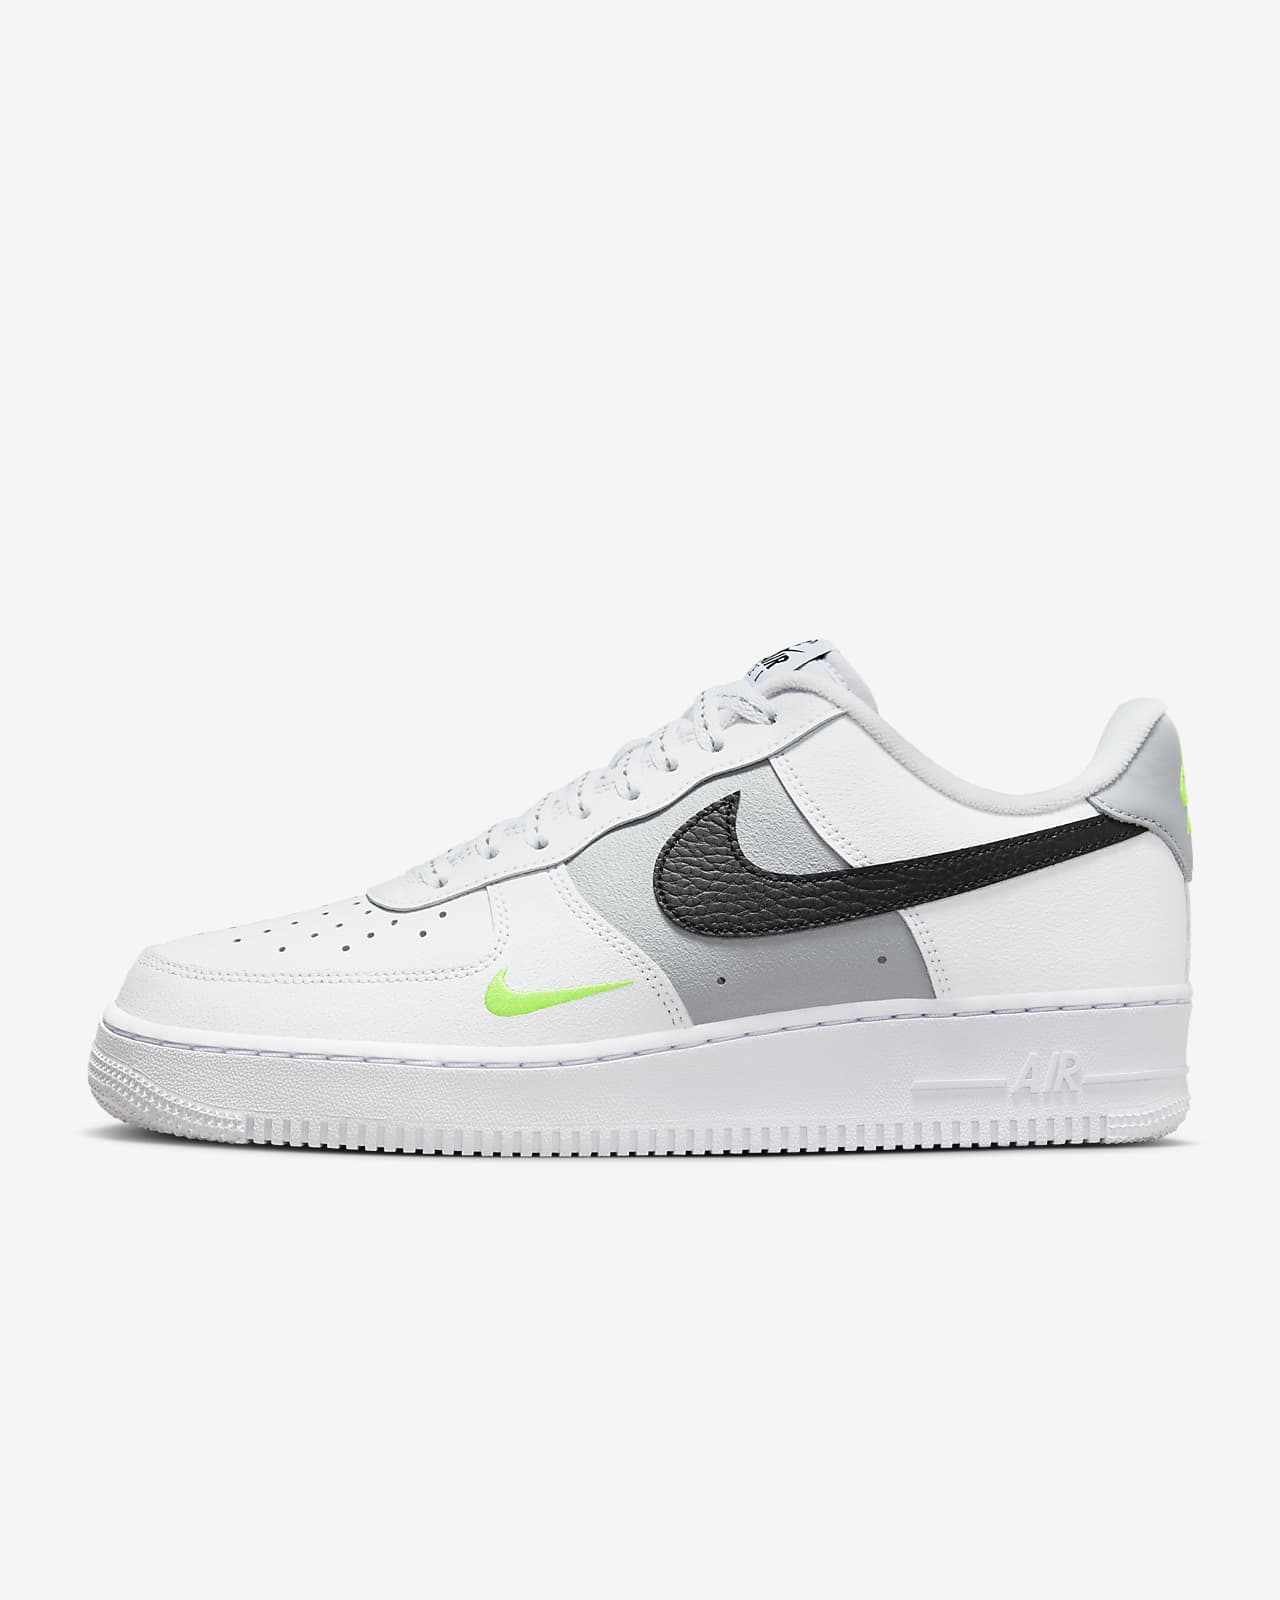 Nike Men's Air Force 1 Shoes (Wolf Grey White White, 10.5) 